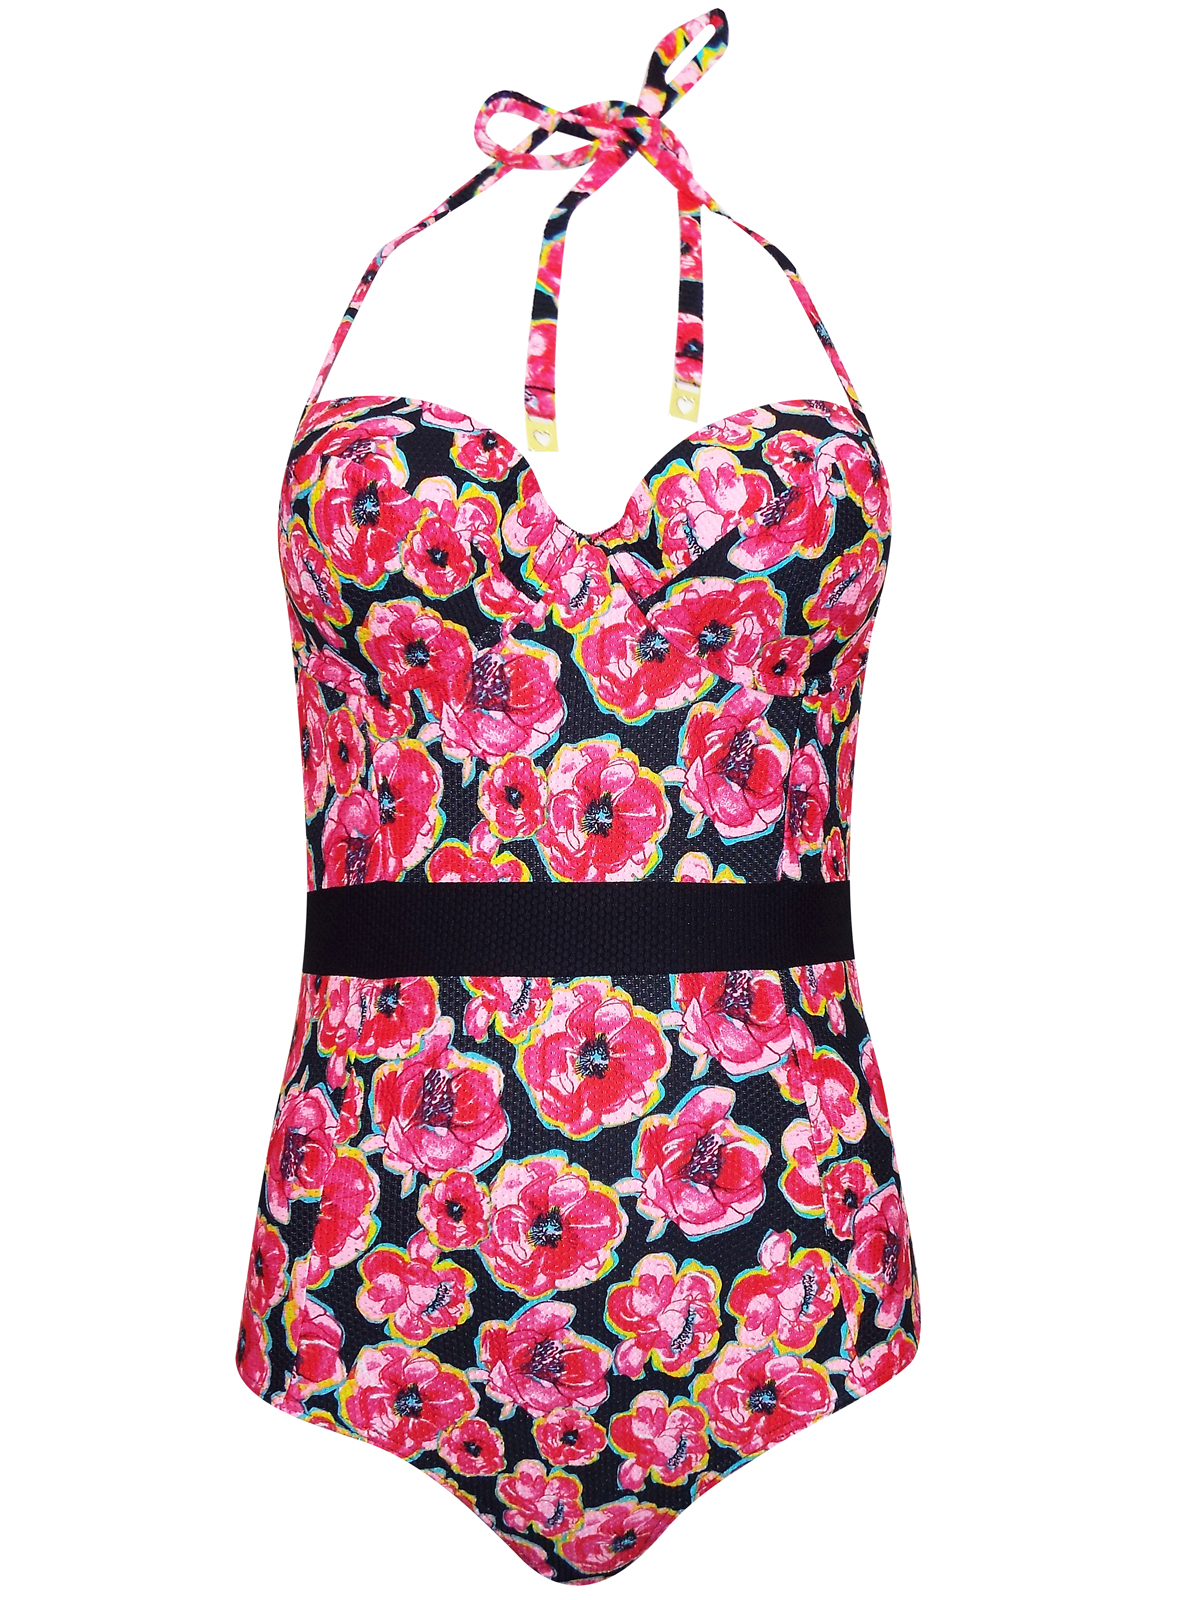 T0PSHOP PINK Poppy Print Bandeau Swimsuit - Size 6 to 14